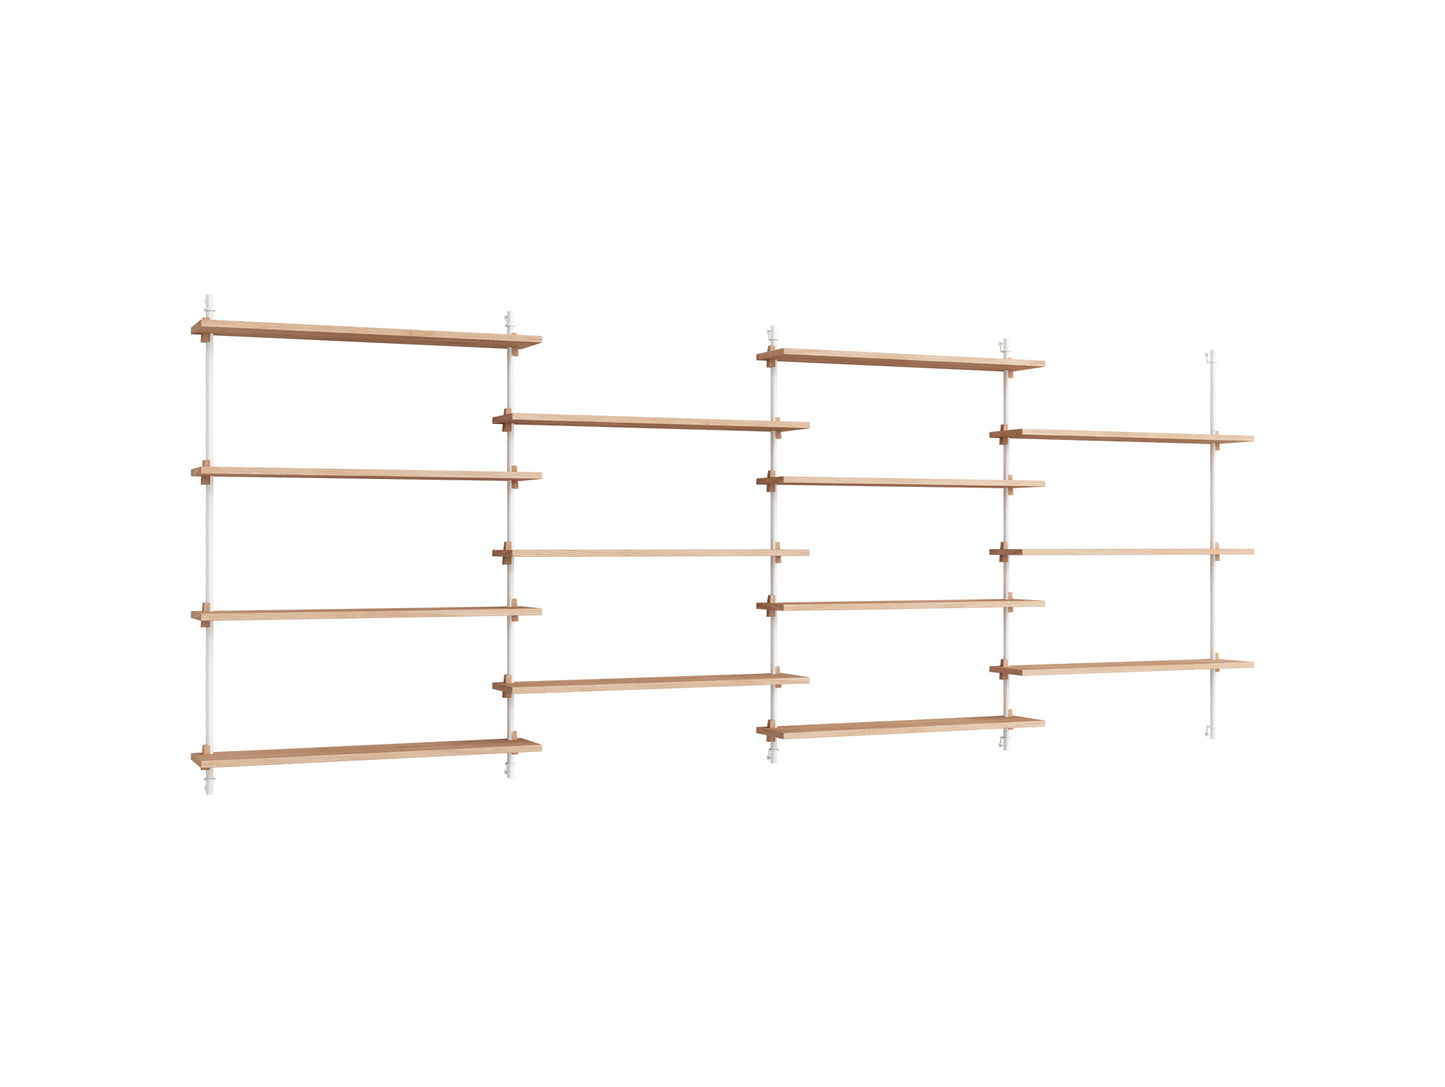 Wall Shelving System Sets (115 cm) by Moebe - WS.115.4 / White Uprights / Oiled Oak